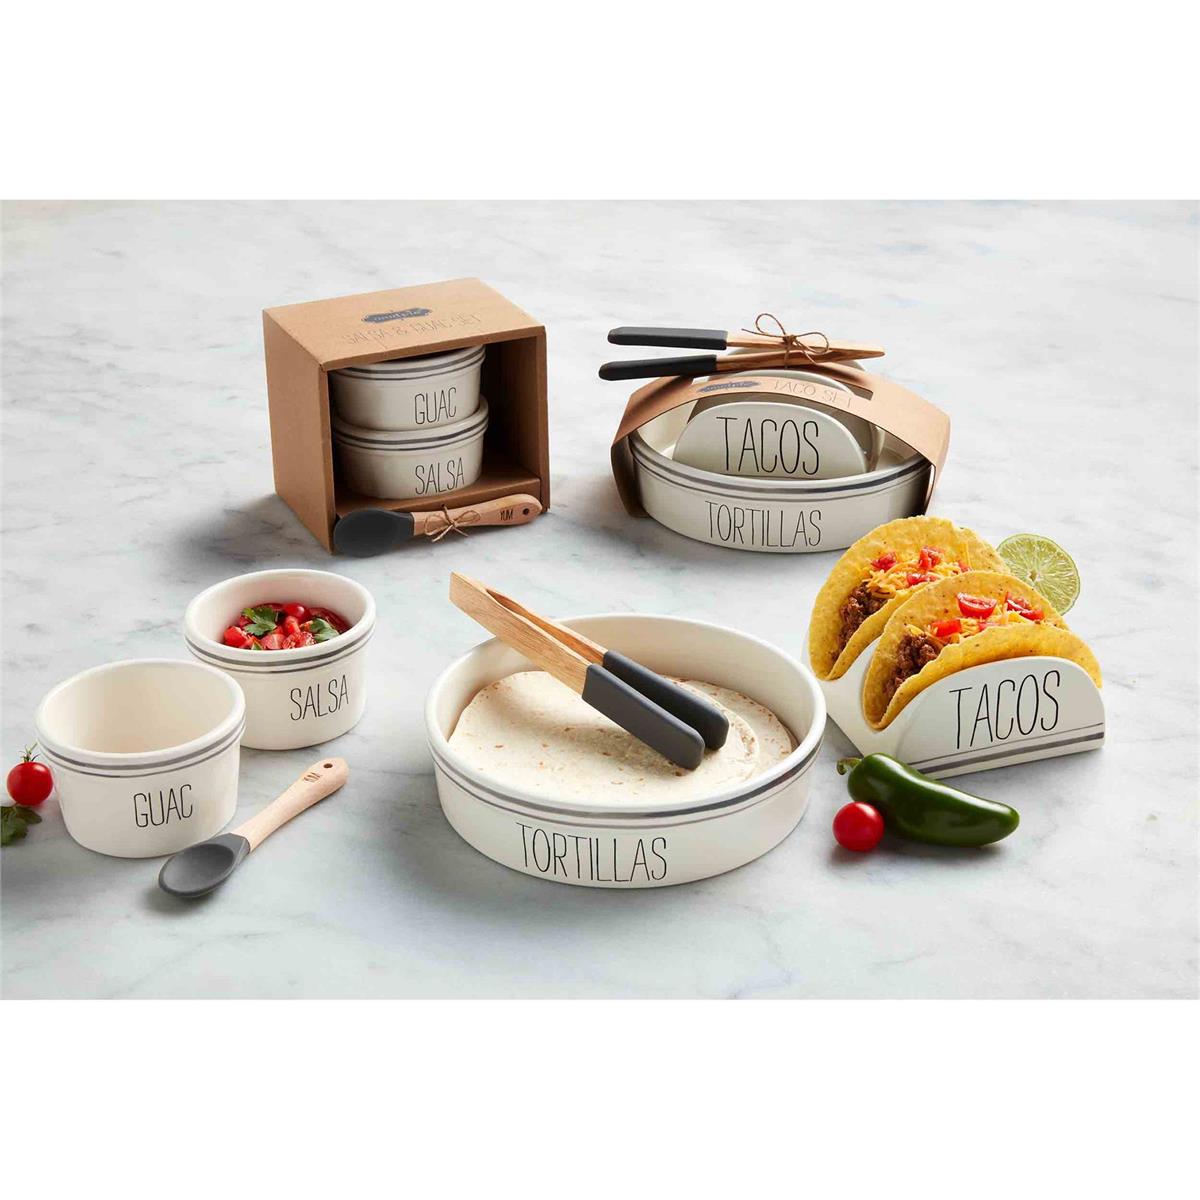 Serve it Up Bowl & Cheese Grater Set